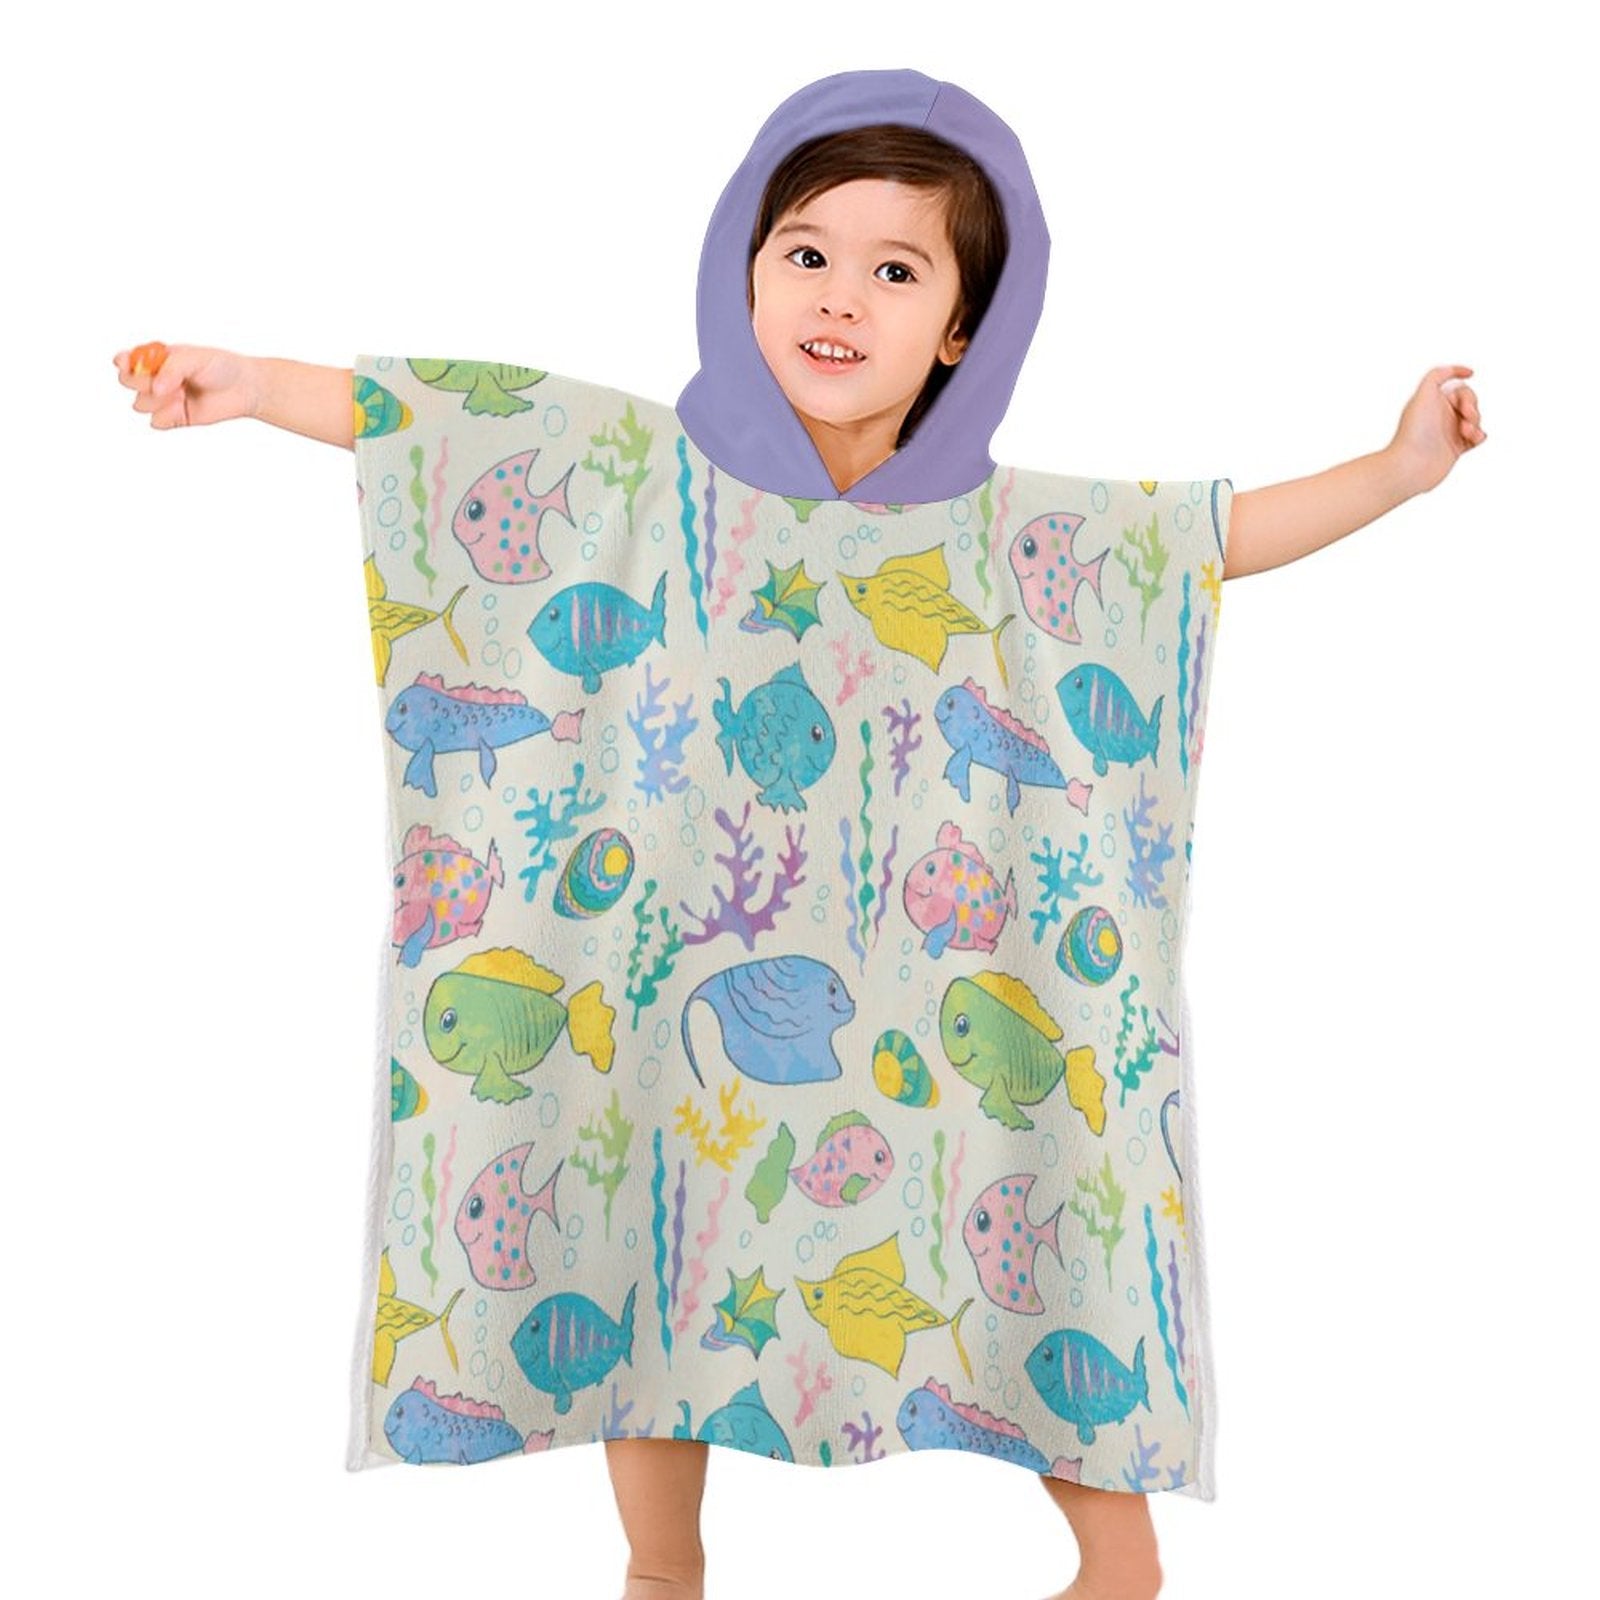 Kids Hooded Terry Cloth Towel - Finny Friends